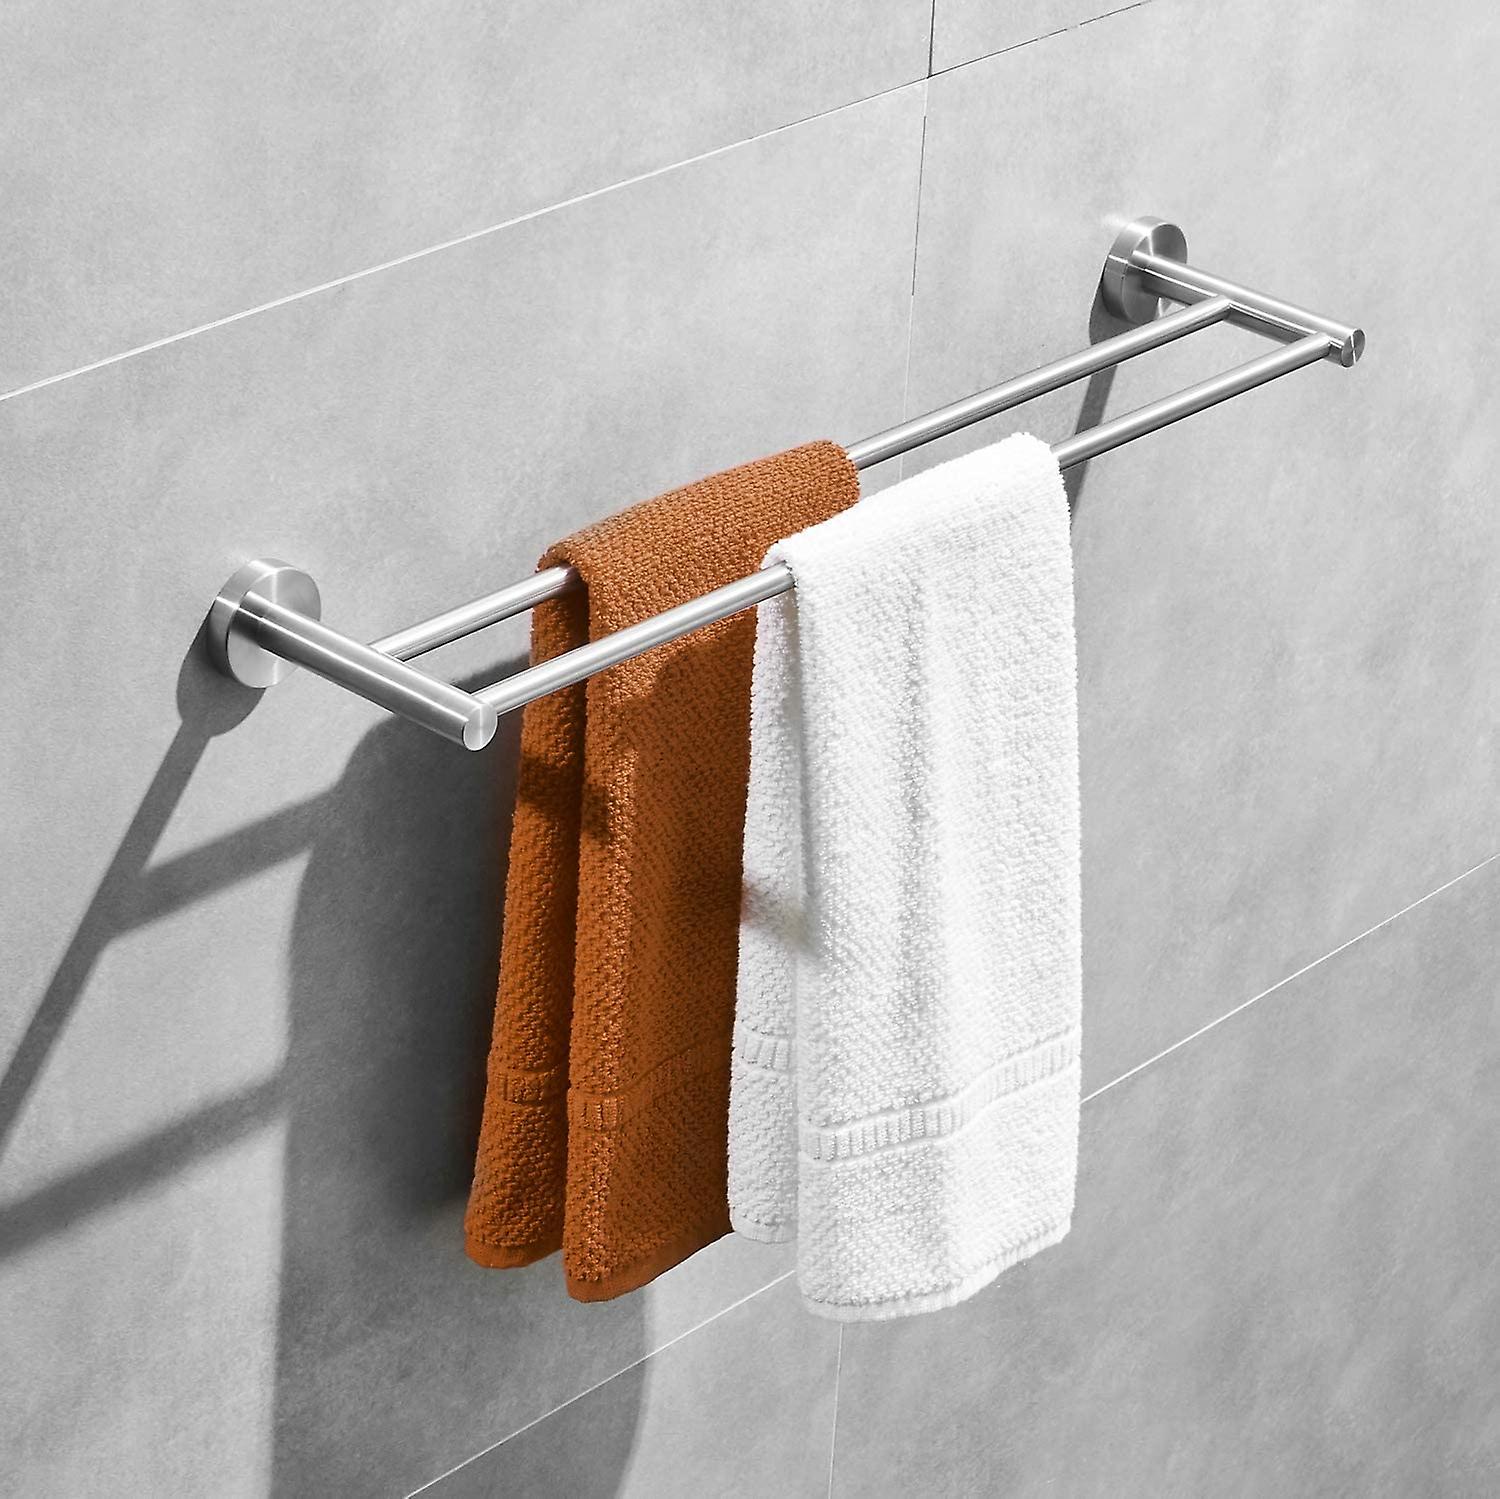 How To Install A Double Towel Bar